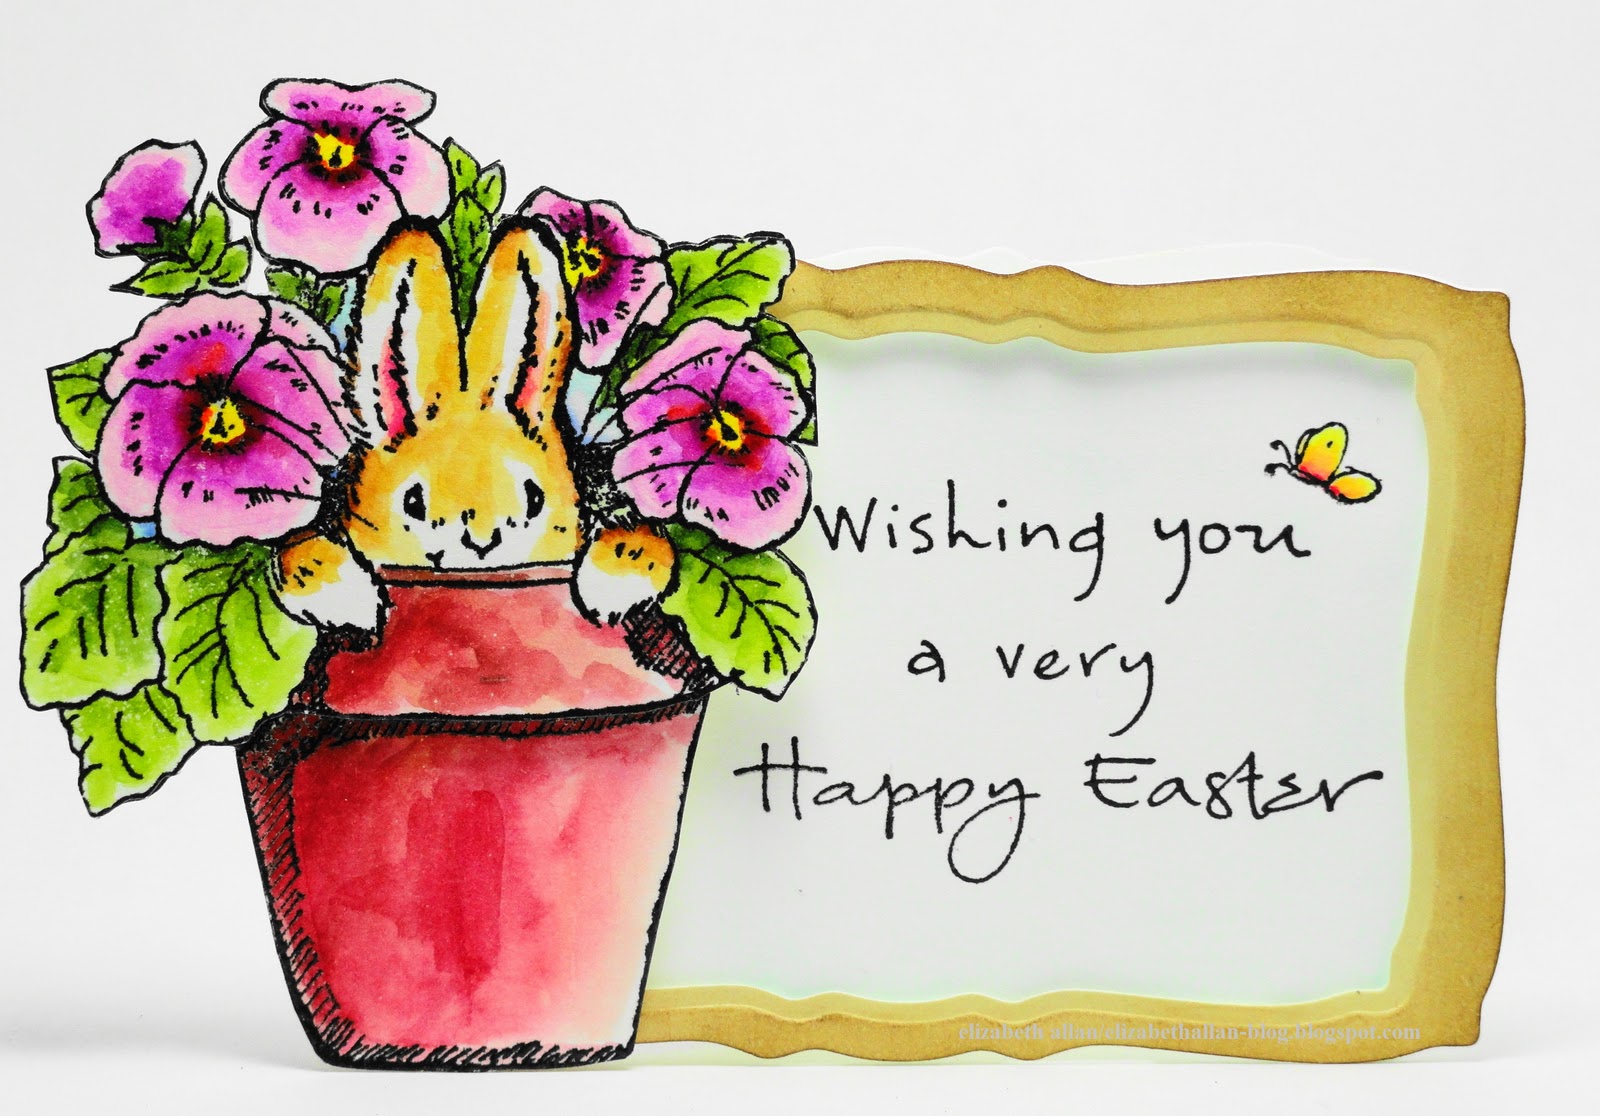 Happy Easter!!! Wishing+You+a+Very+Happy+Easter